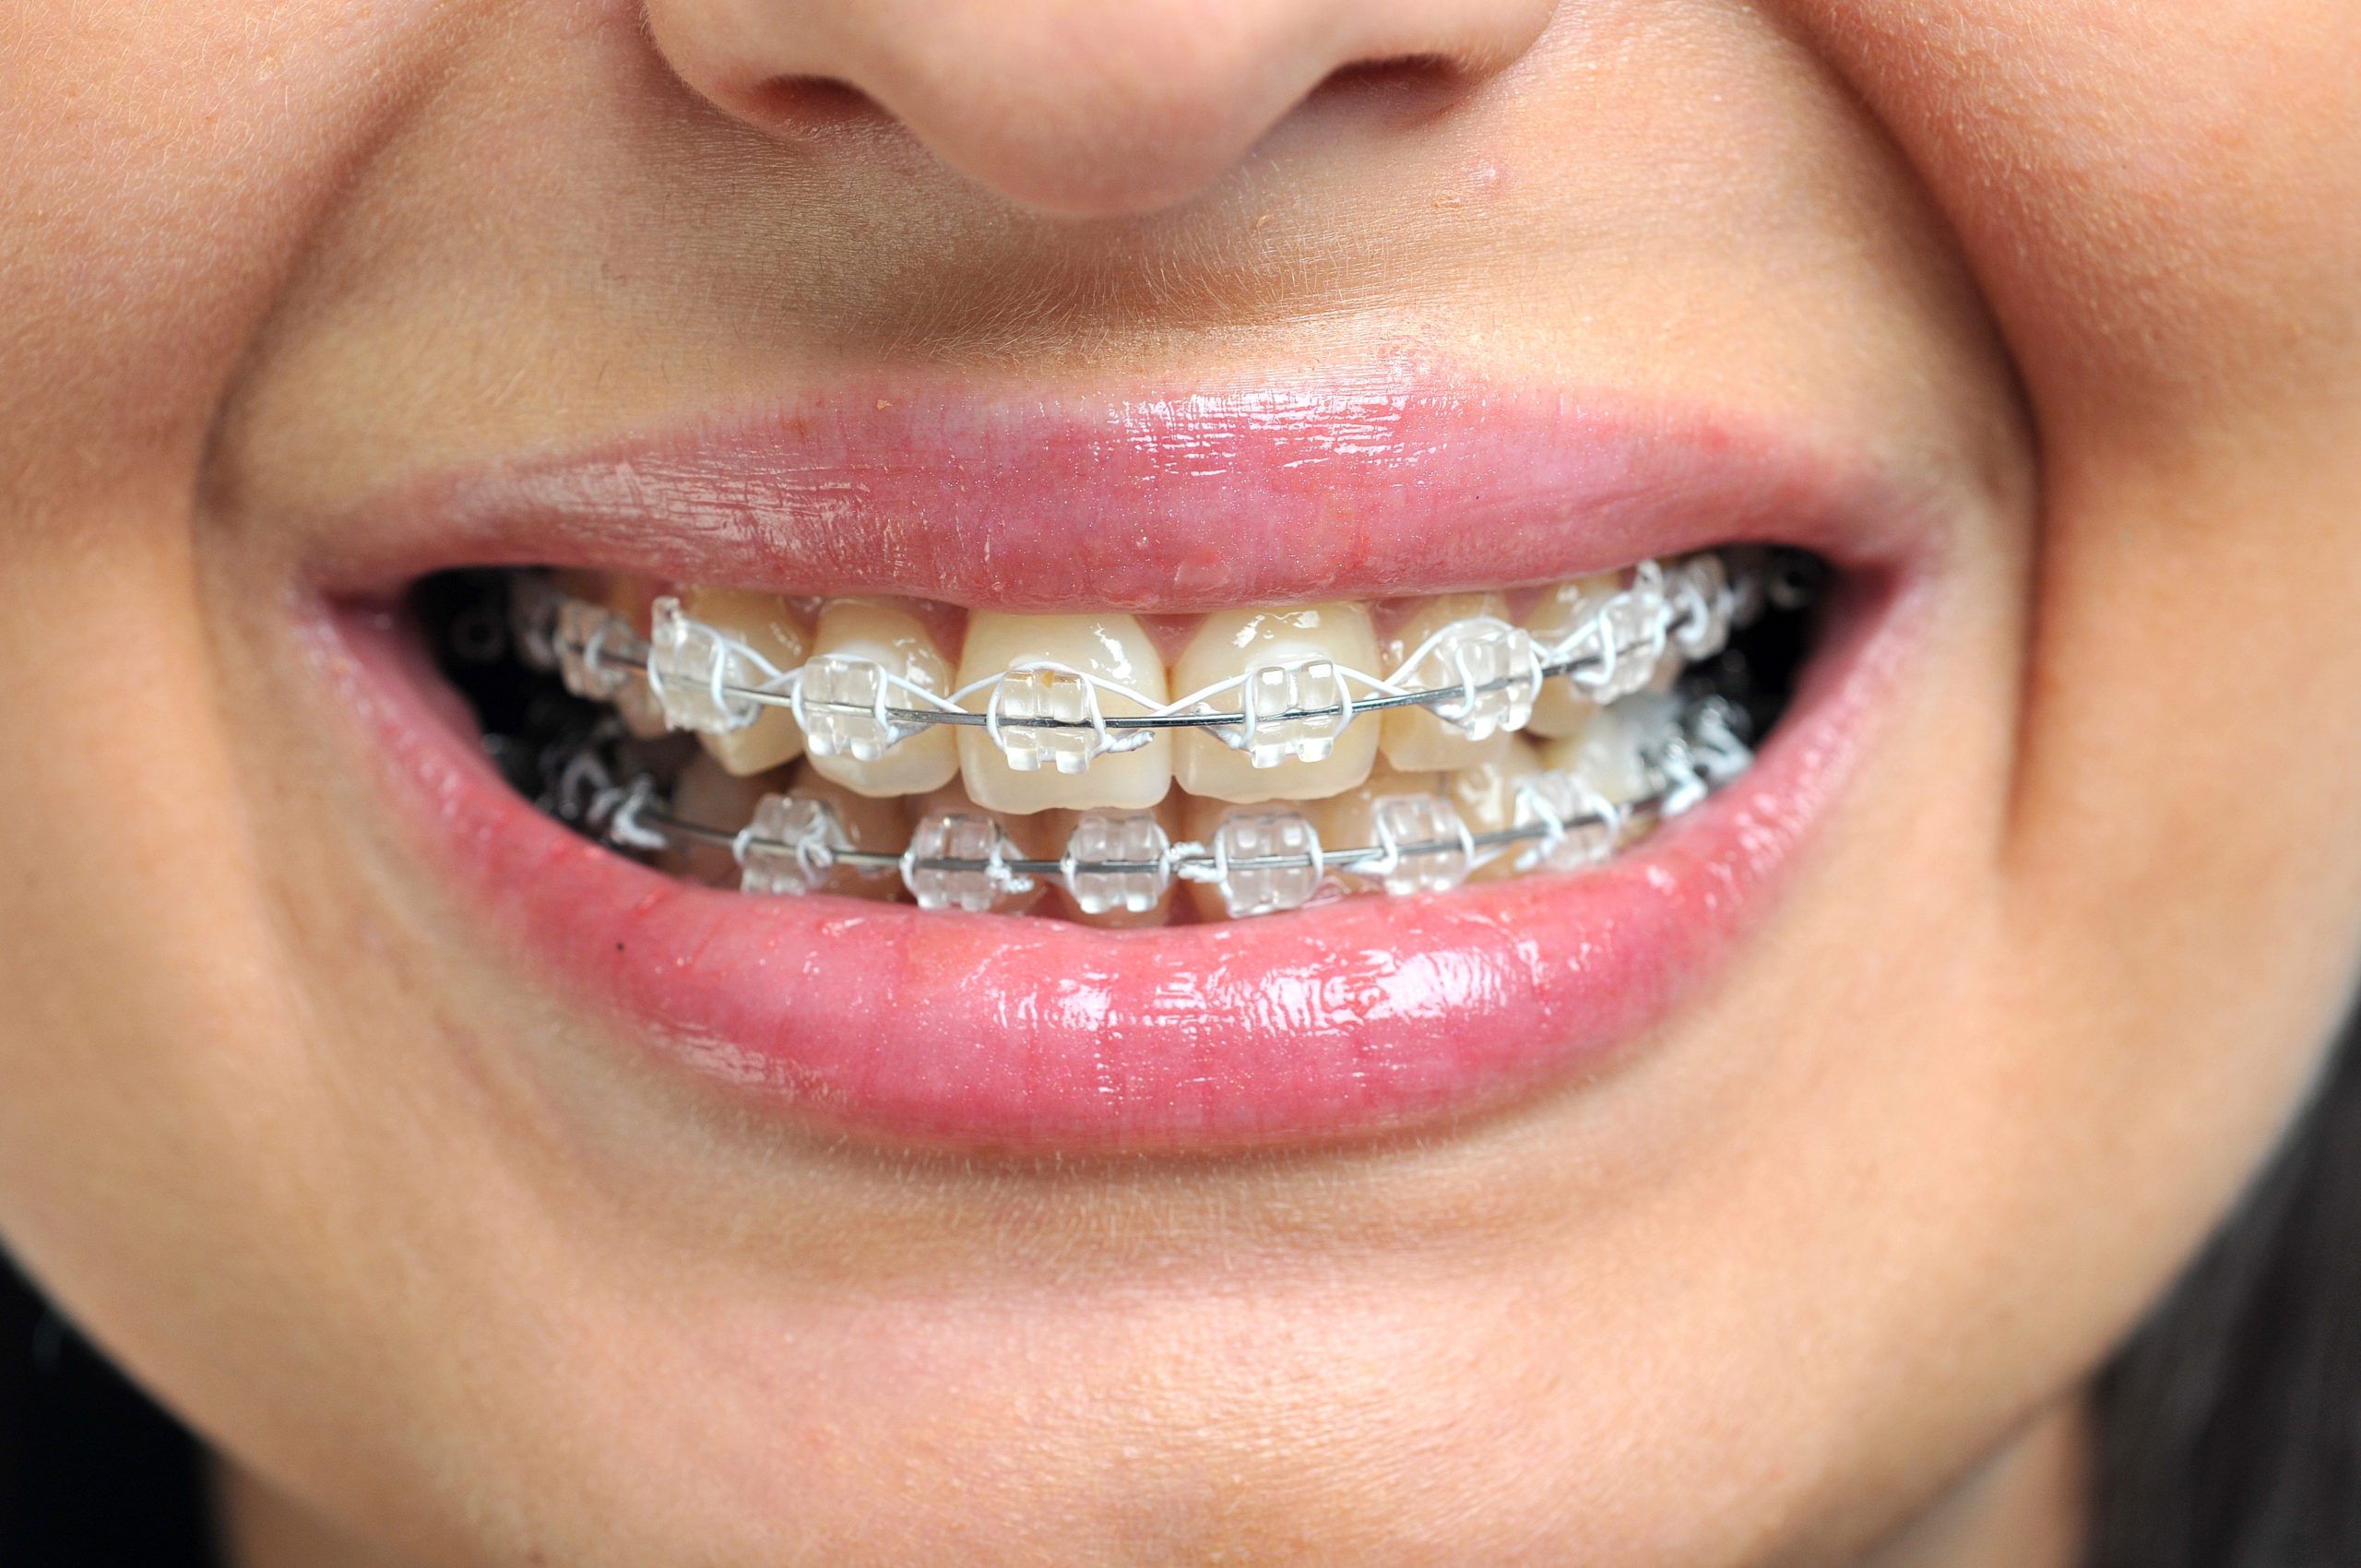 The Biggest MIstake You Can Make with Invisalign Braces